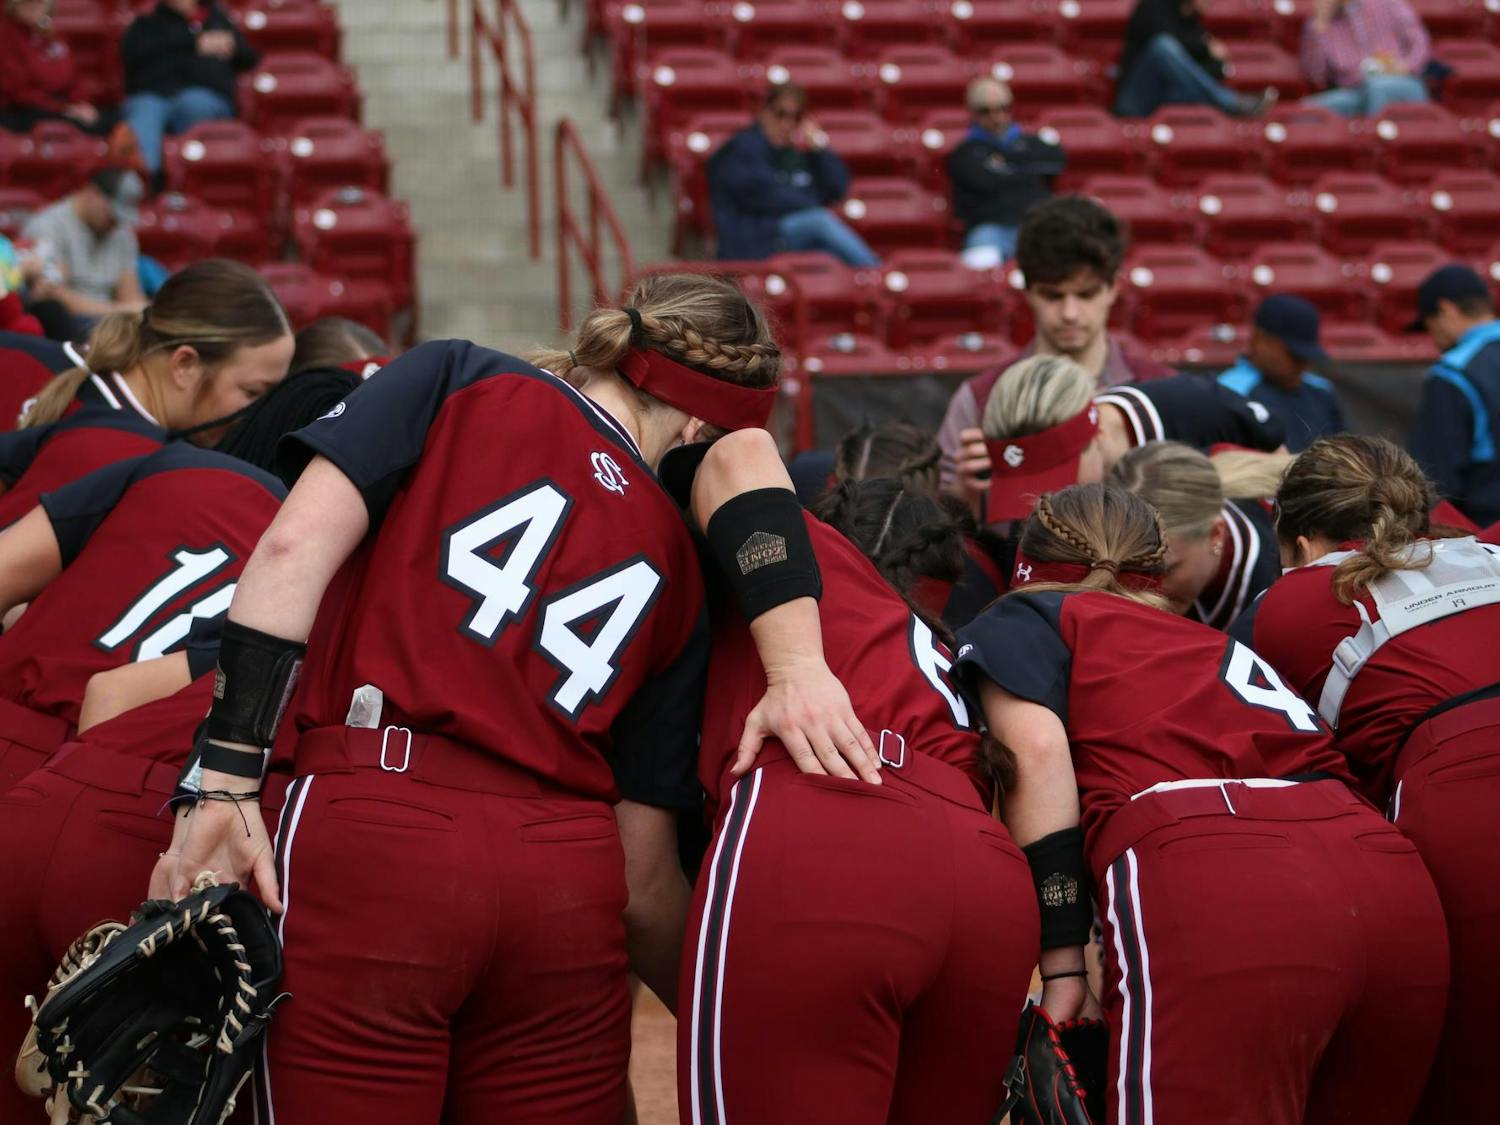 The Gamecock Softball team huddles at Beckham Field before its 4-1 victory over the University of Delaware on Feb. 17, 2023. The Gamecocks enter the 2024 season ranked No. 23.